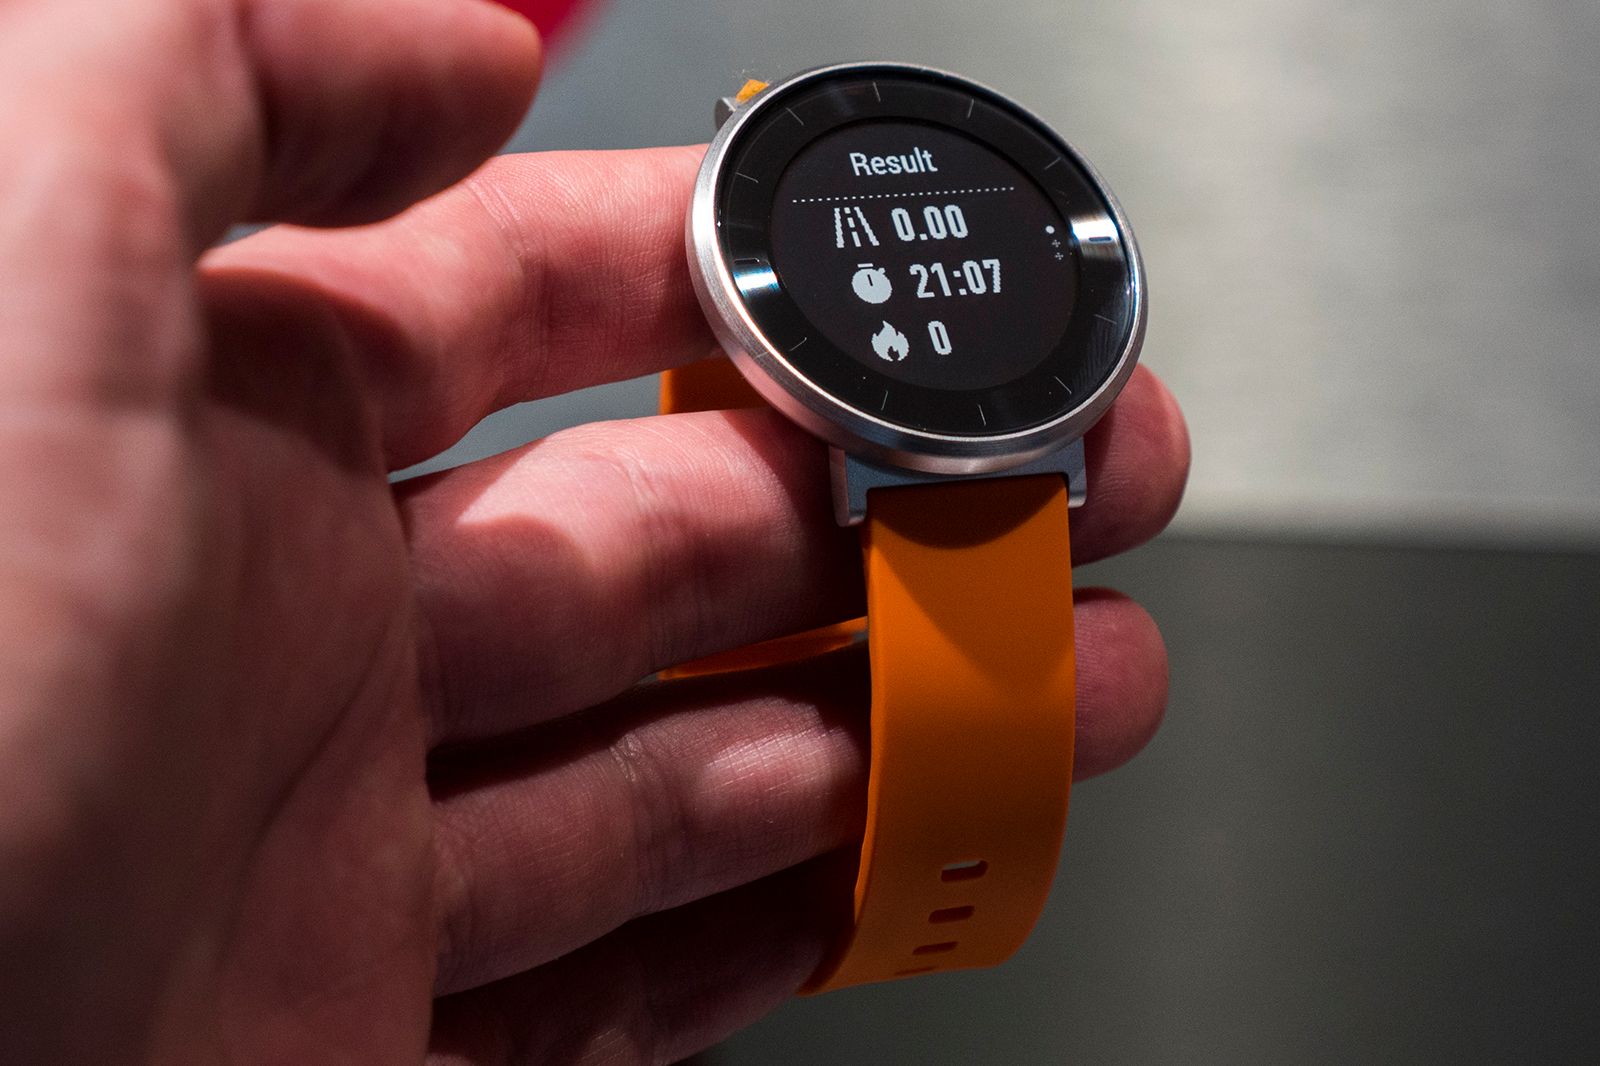 huawei fit delivers heart rate monitor in a watch style fitness tracker image 2